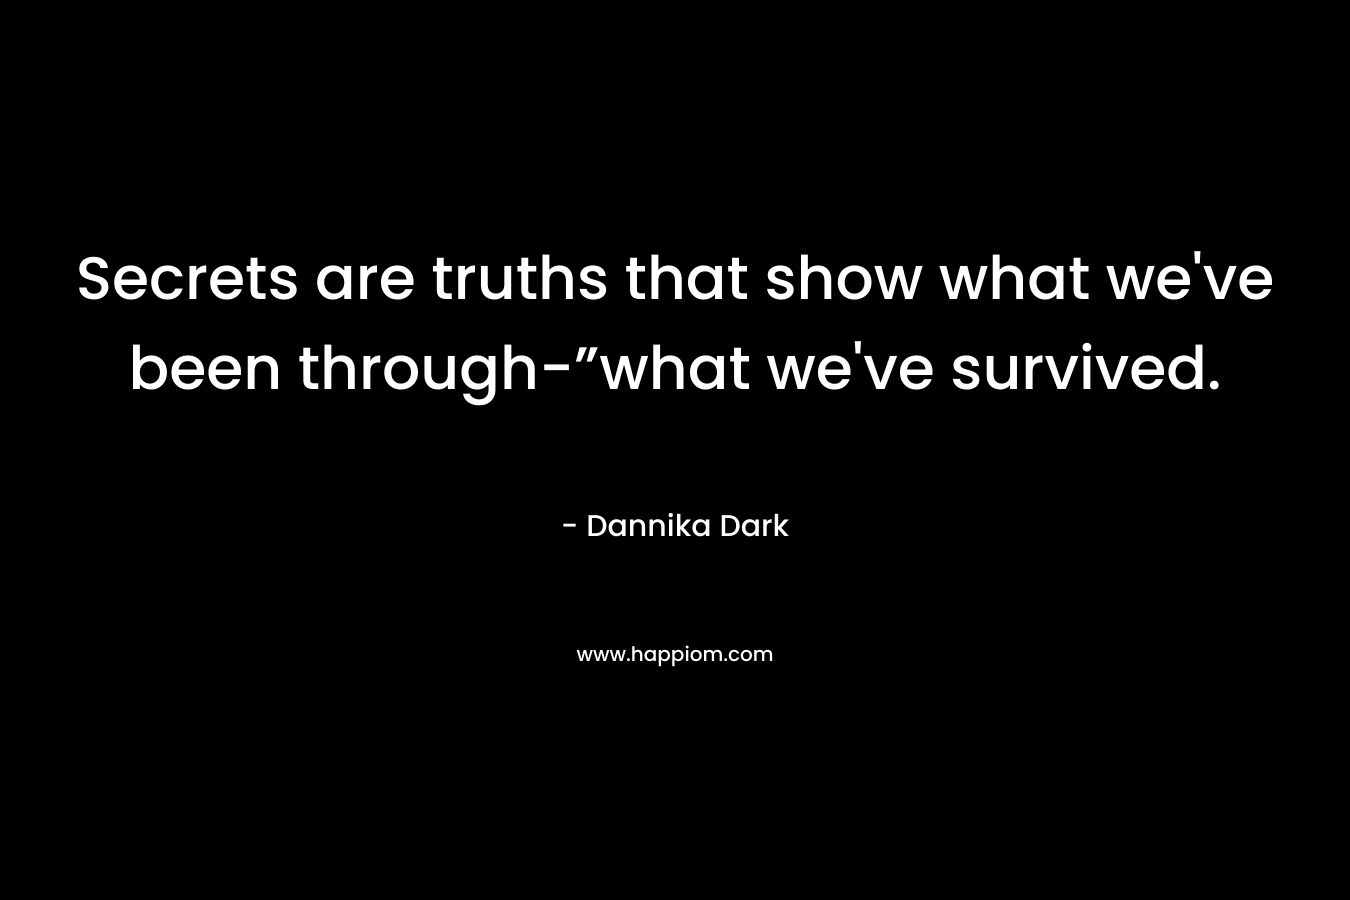 Secrets are truths that show what we’ve been through-”what we’ve survived. – Dannika Dark